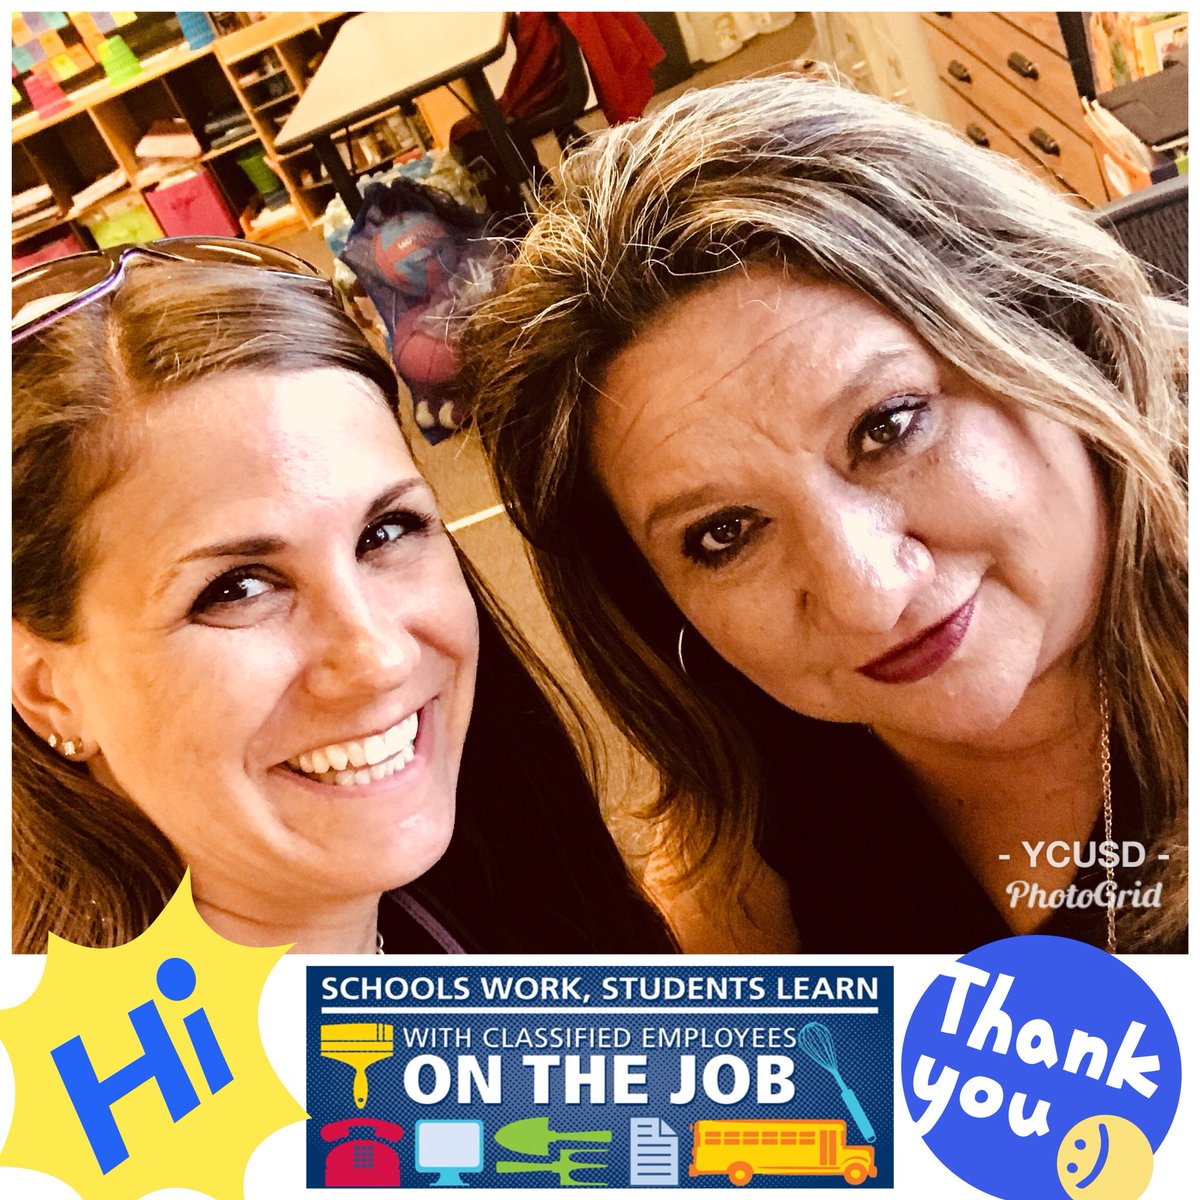 Thank you Rachel Chavez for always giving your all to the Eagle Care After School Program #KidsDeserveIt #TBEagles #BarryHornets #LincolnVikings #ClassifiedRocks #makingschoolswork  @BrianBrownYC @YCUSD @doeosumi @DanielleSchmidl